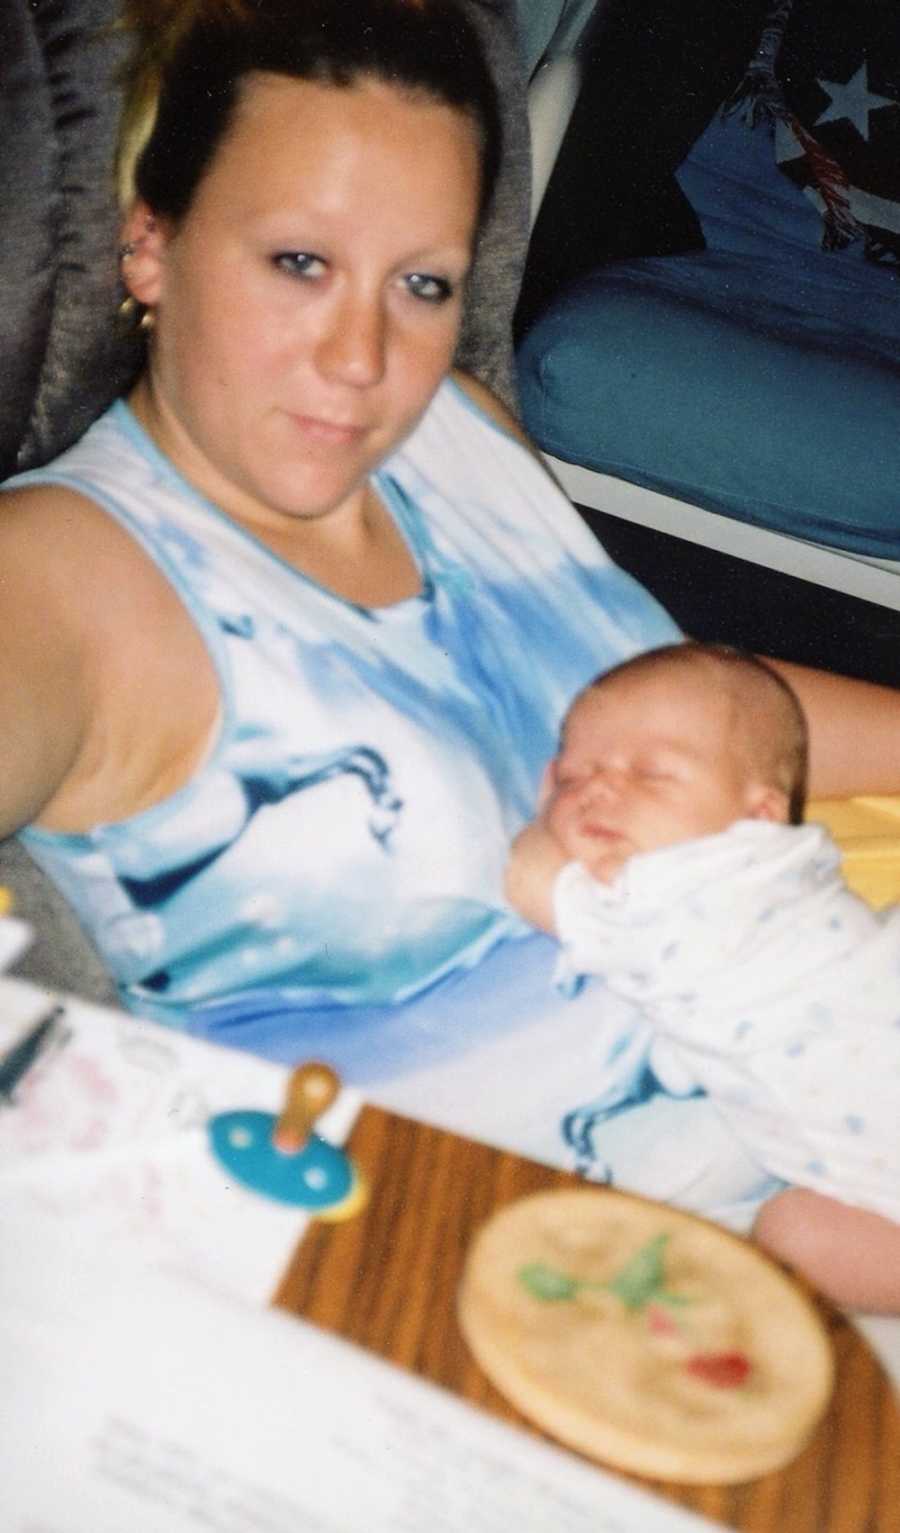 Woman sits in chair with baby asleep in her lap